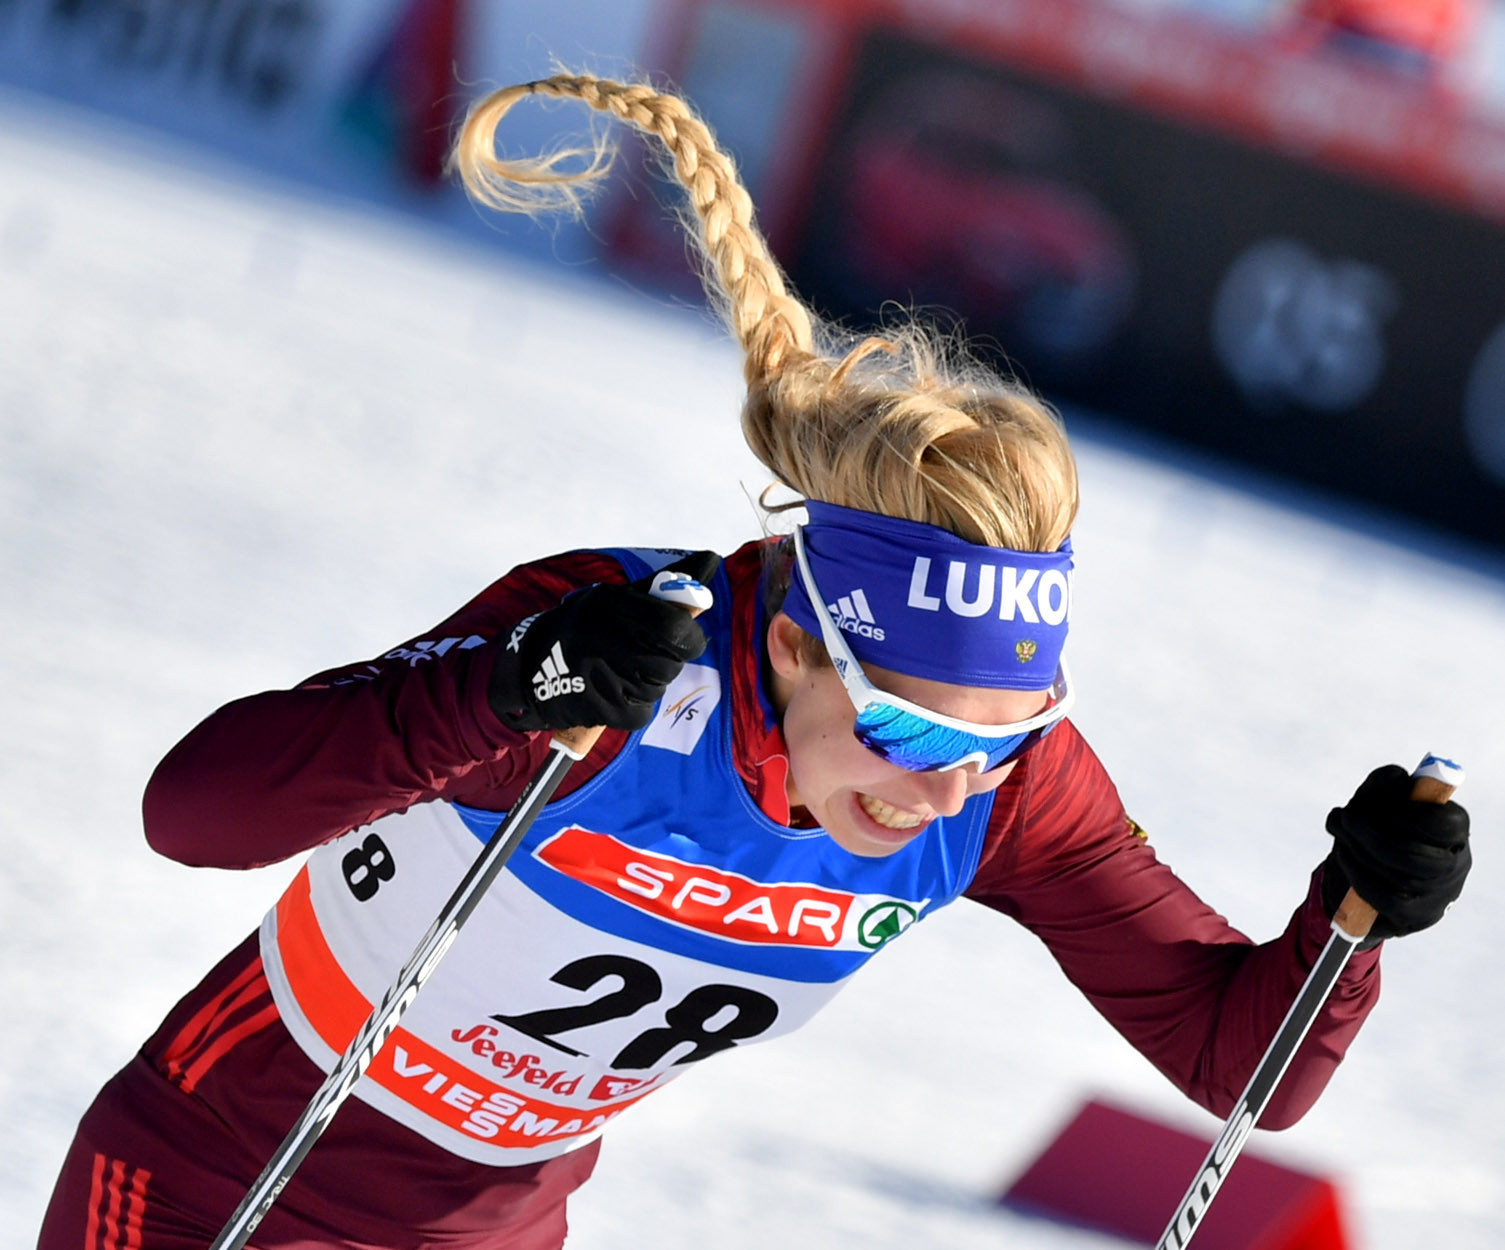 Russian cross-country skier set to have four-year ban halved because it is against rules